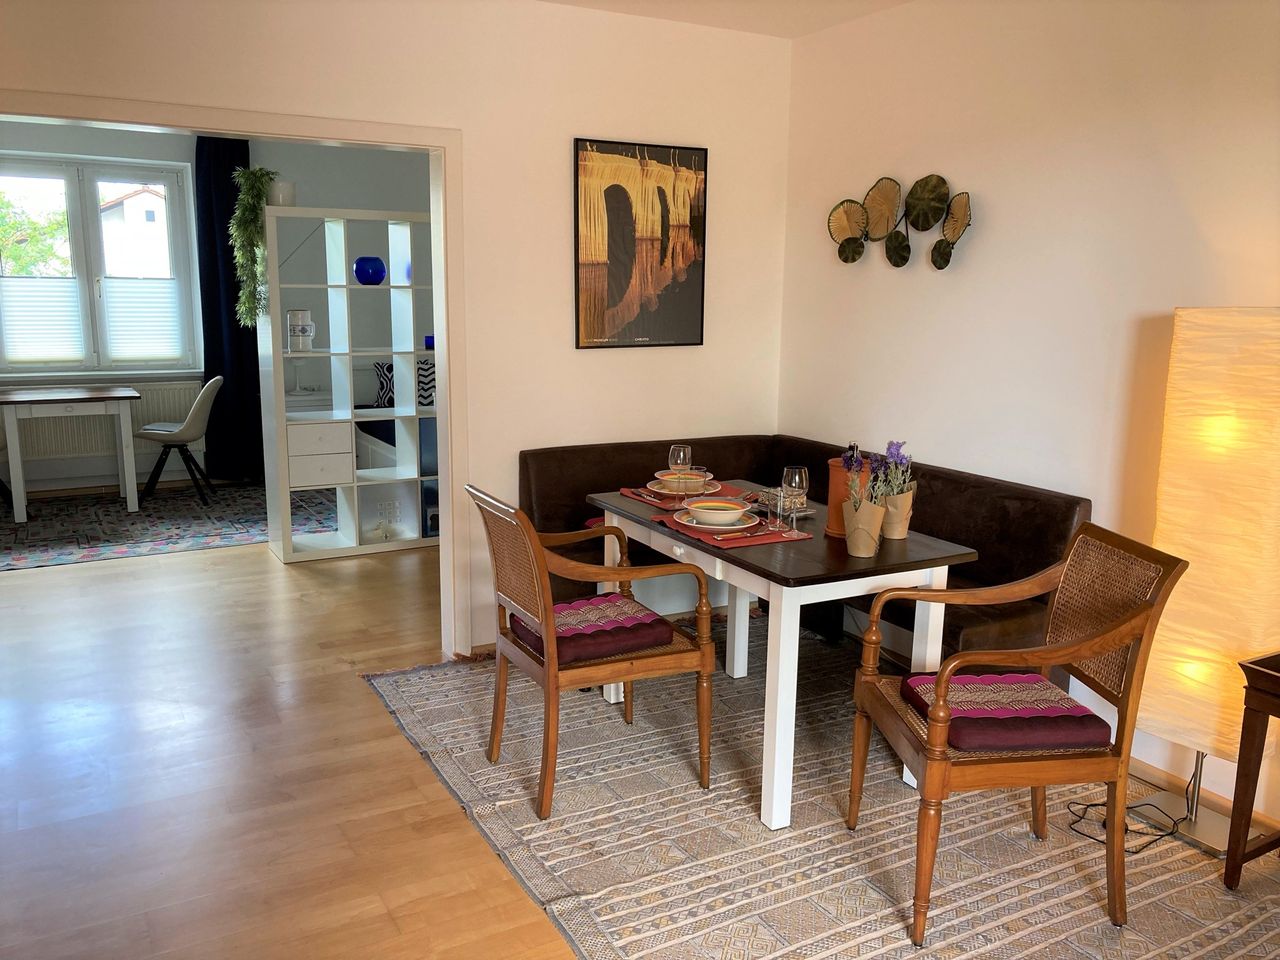 Degerloch, near Kelley, ISS: Your fully equipped home away from home with excellent connections to all POIs in Stuttgart